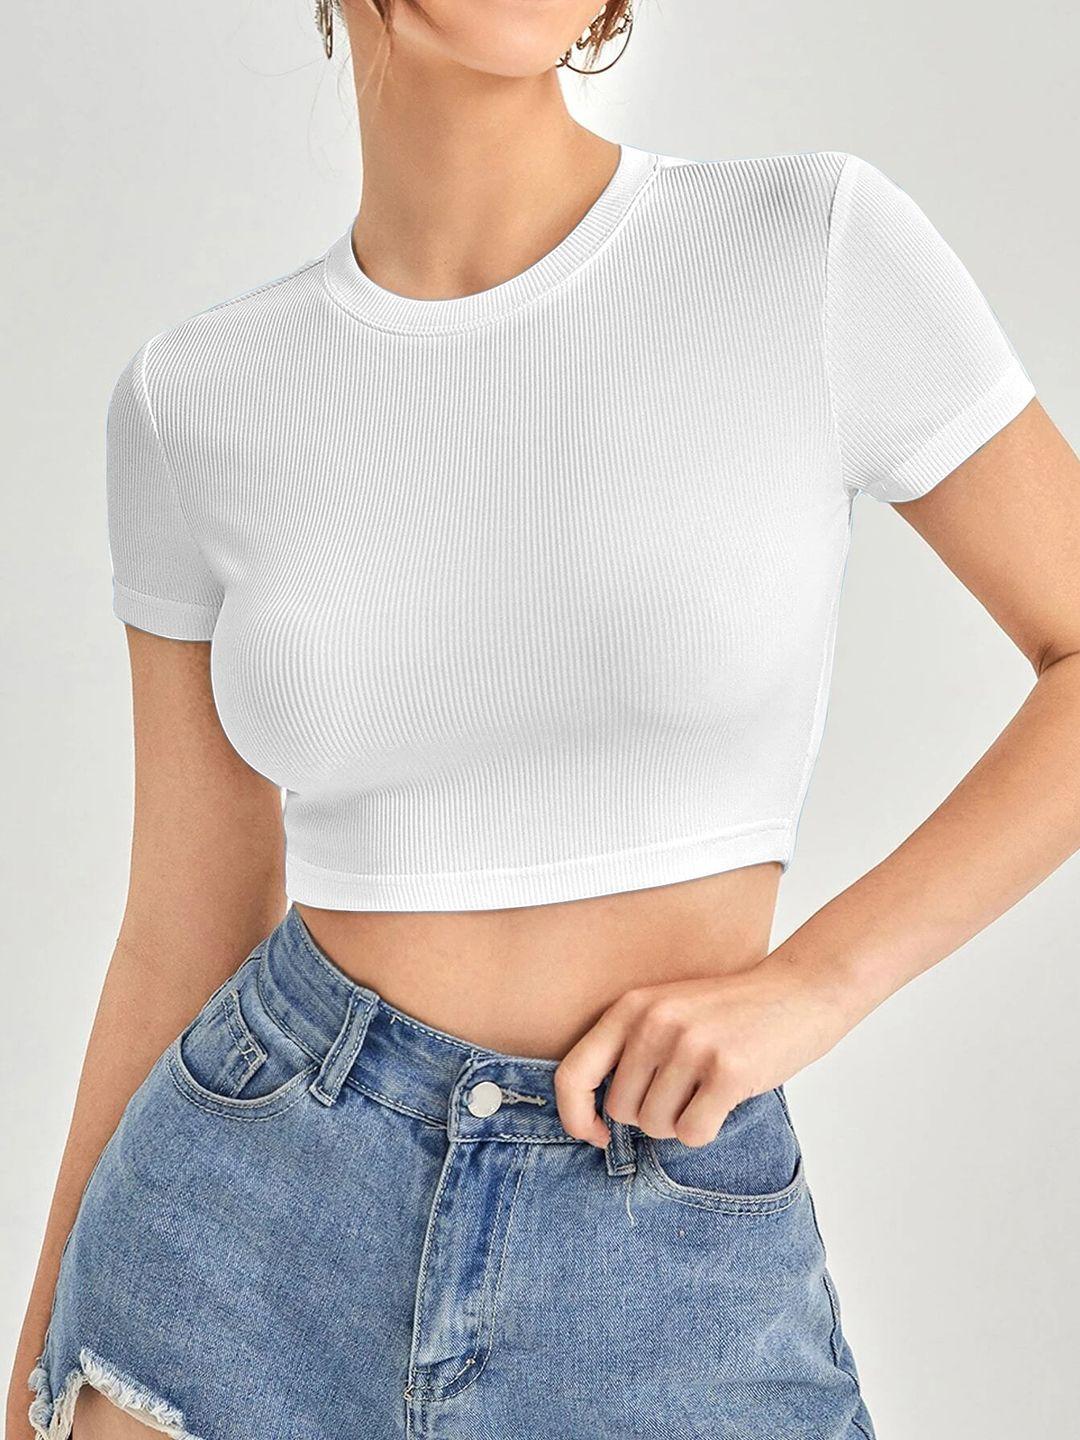 stylecast x slyck round neck fitted crop top